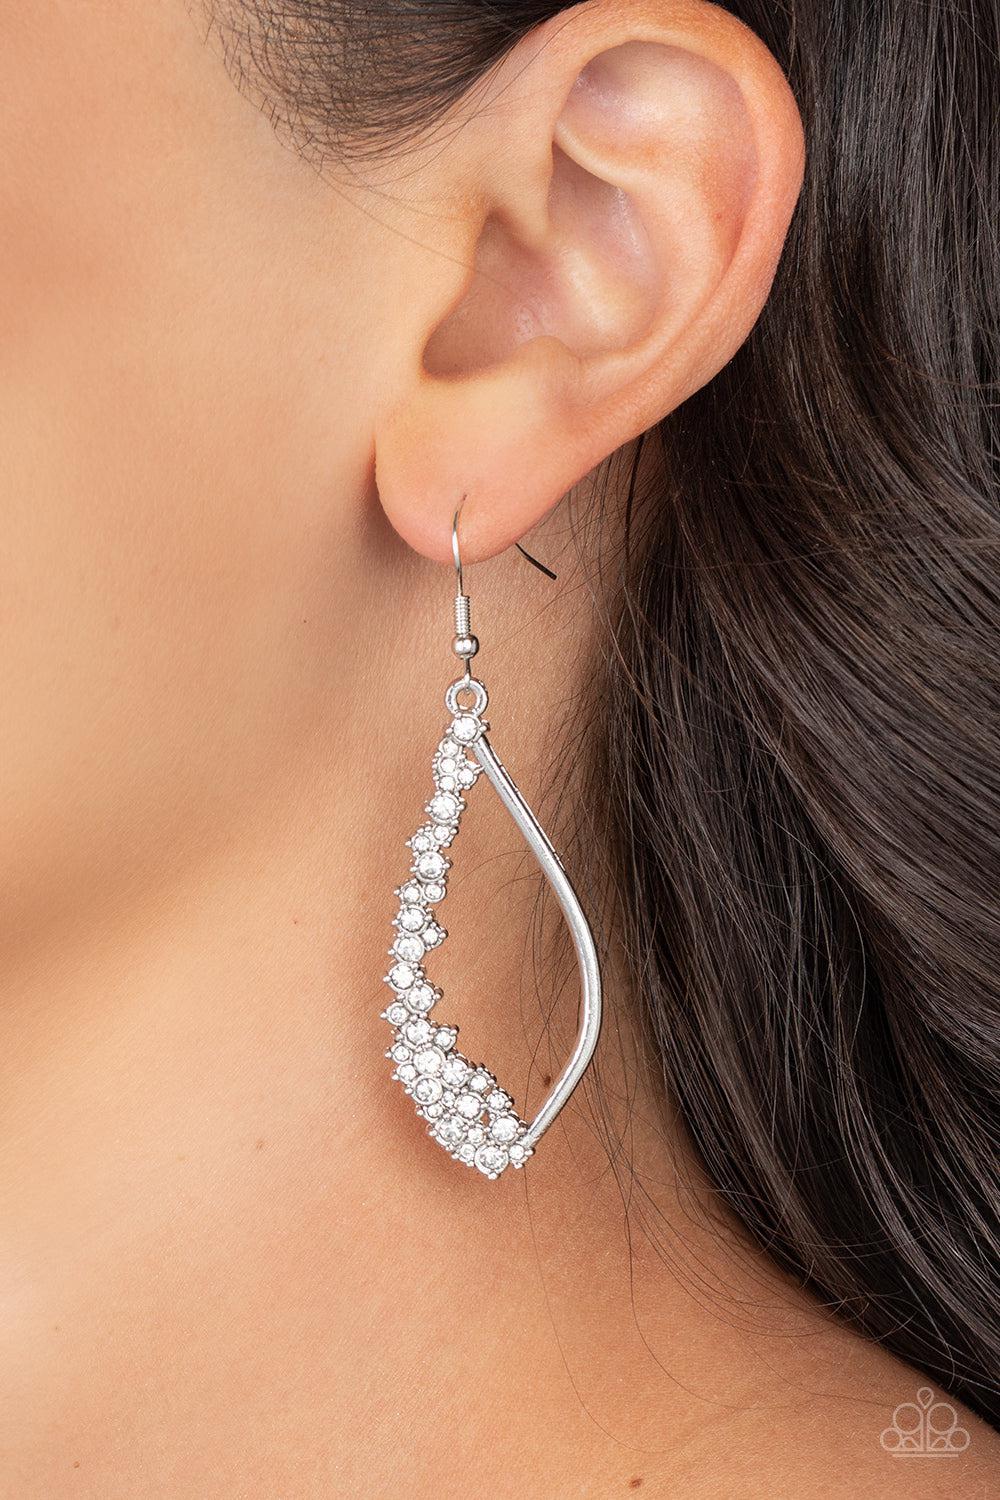 Sparkly Side Effects White Rhinestone Earrings - Paparazzi Accessories- lightbox - CarasShop.com - $5 Jewelry by Cara Jewels